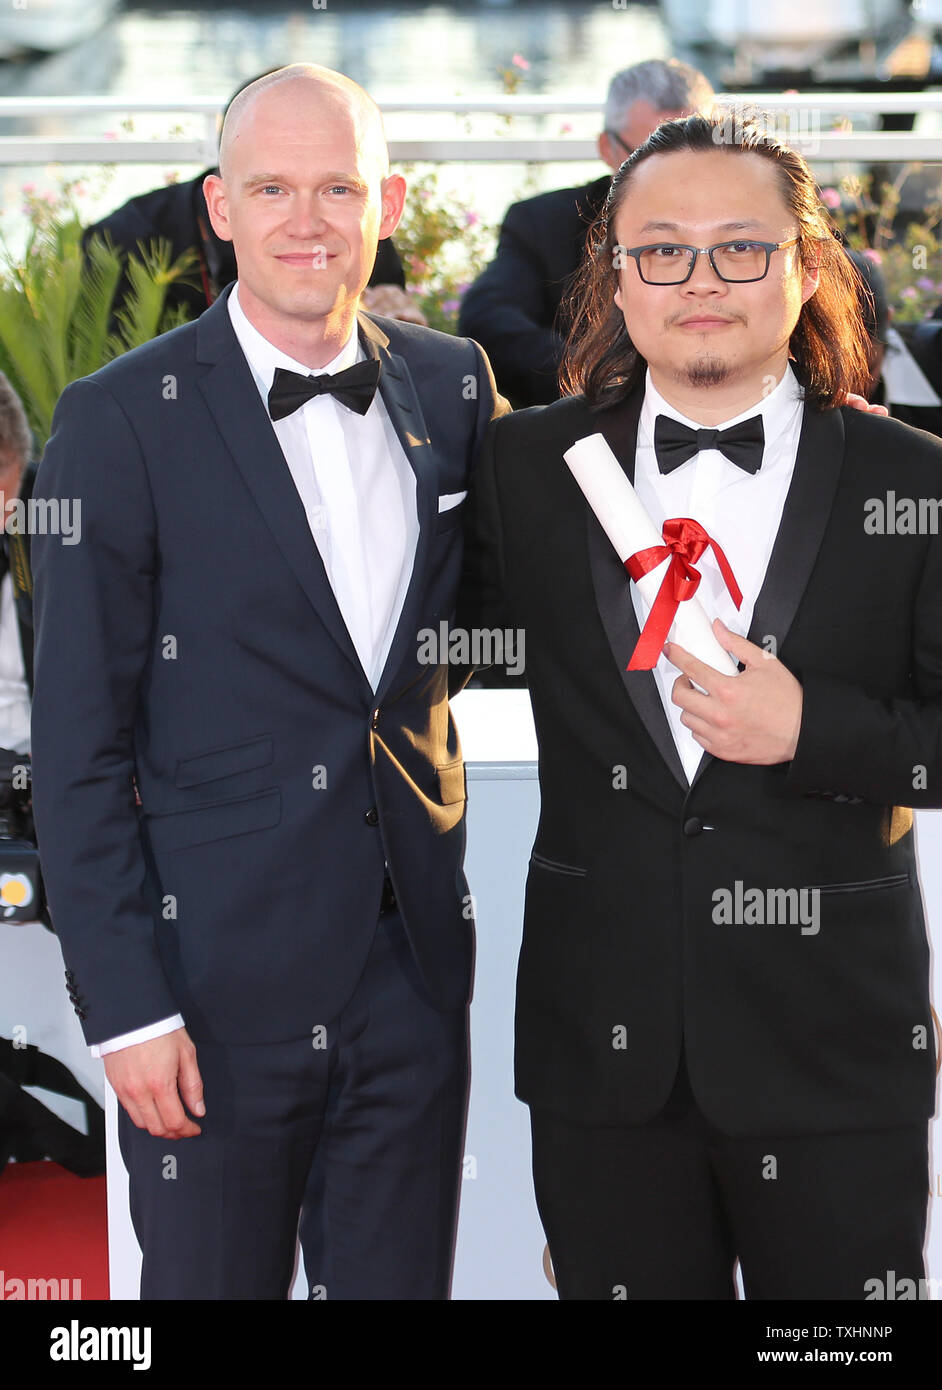 Teppo Airaksinen (L) and Qiu Yang arrive at the award photocall after  receiving the "Special Mention" and "Best Short Film" prizes (respectively)  for their films "The Ceiling" and "A Gentle Night" during